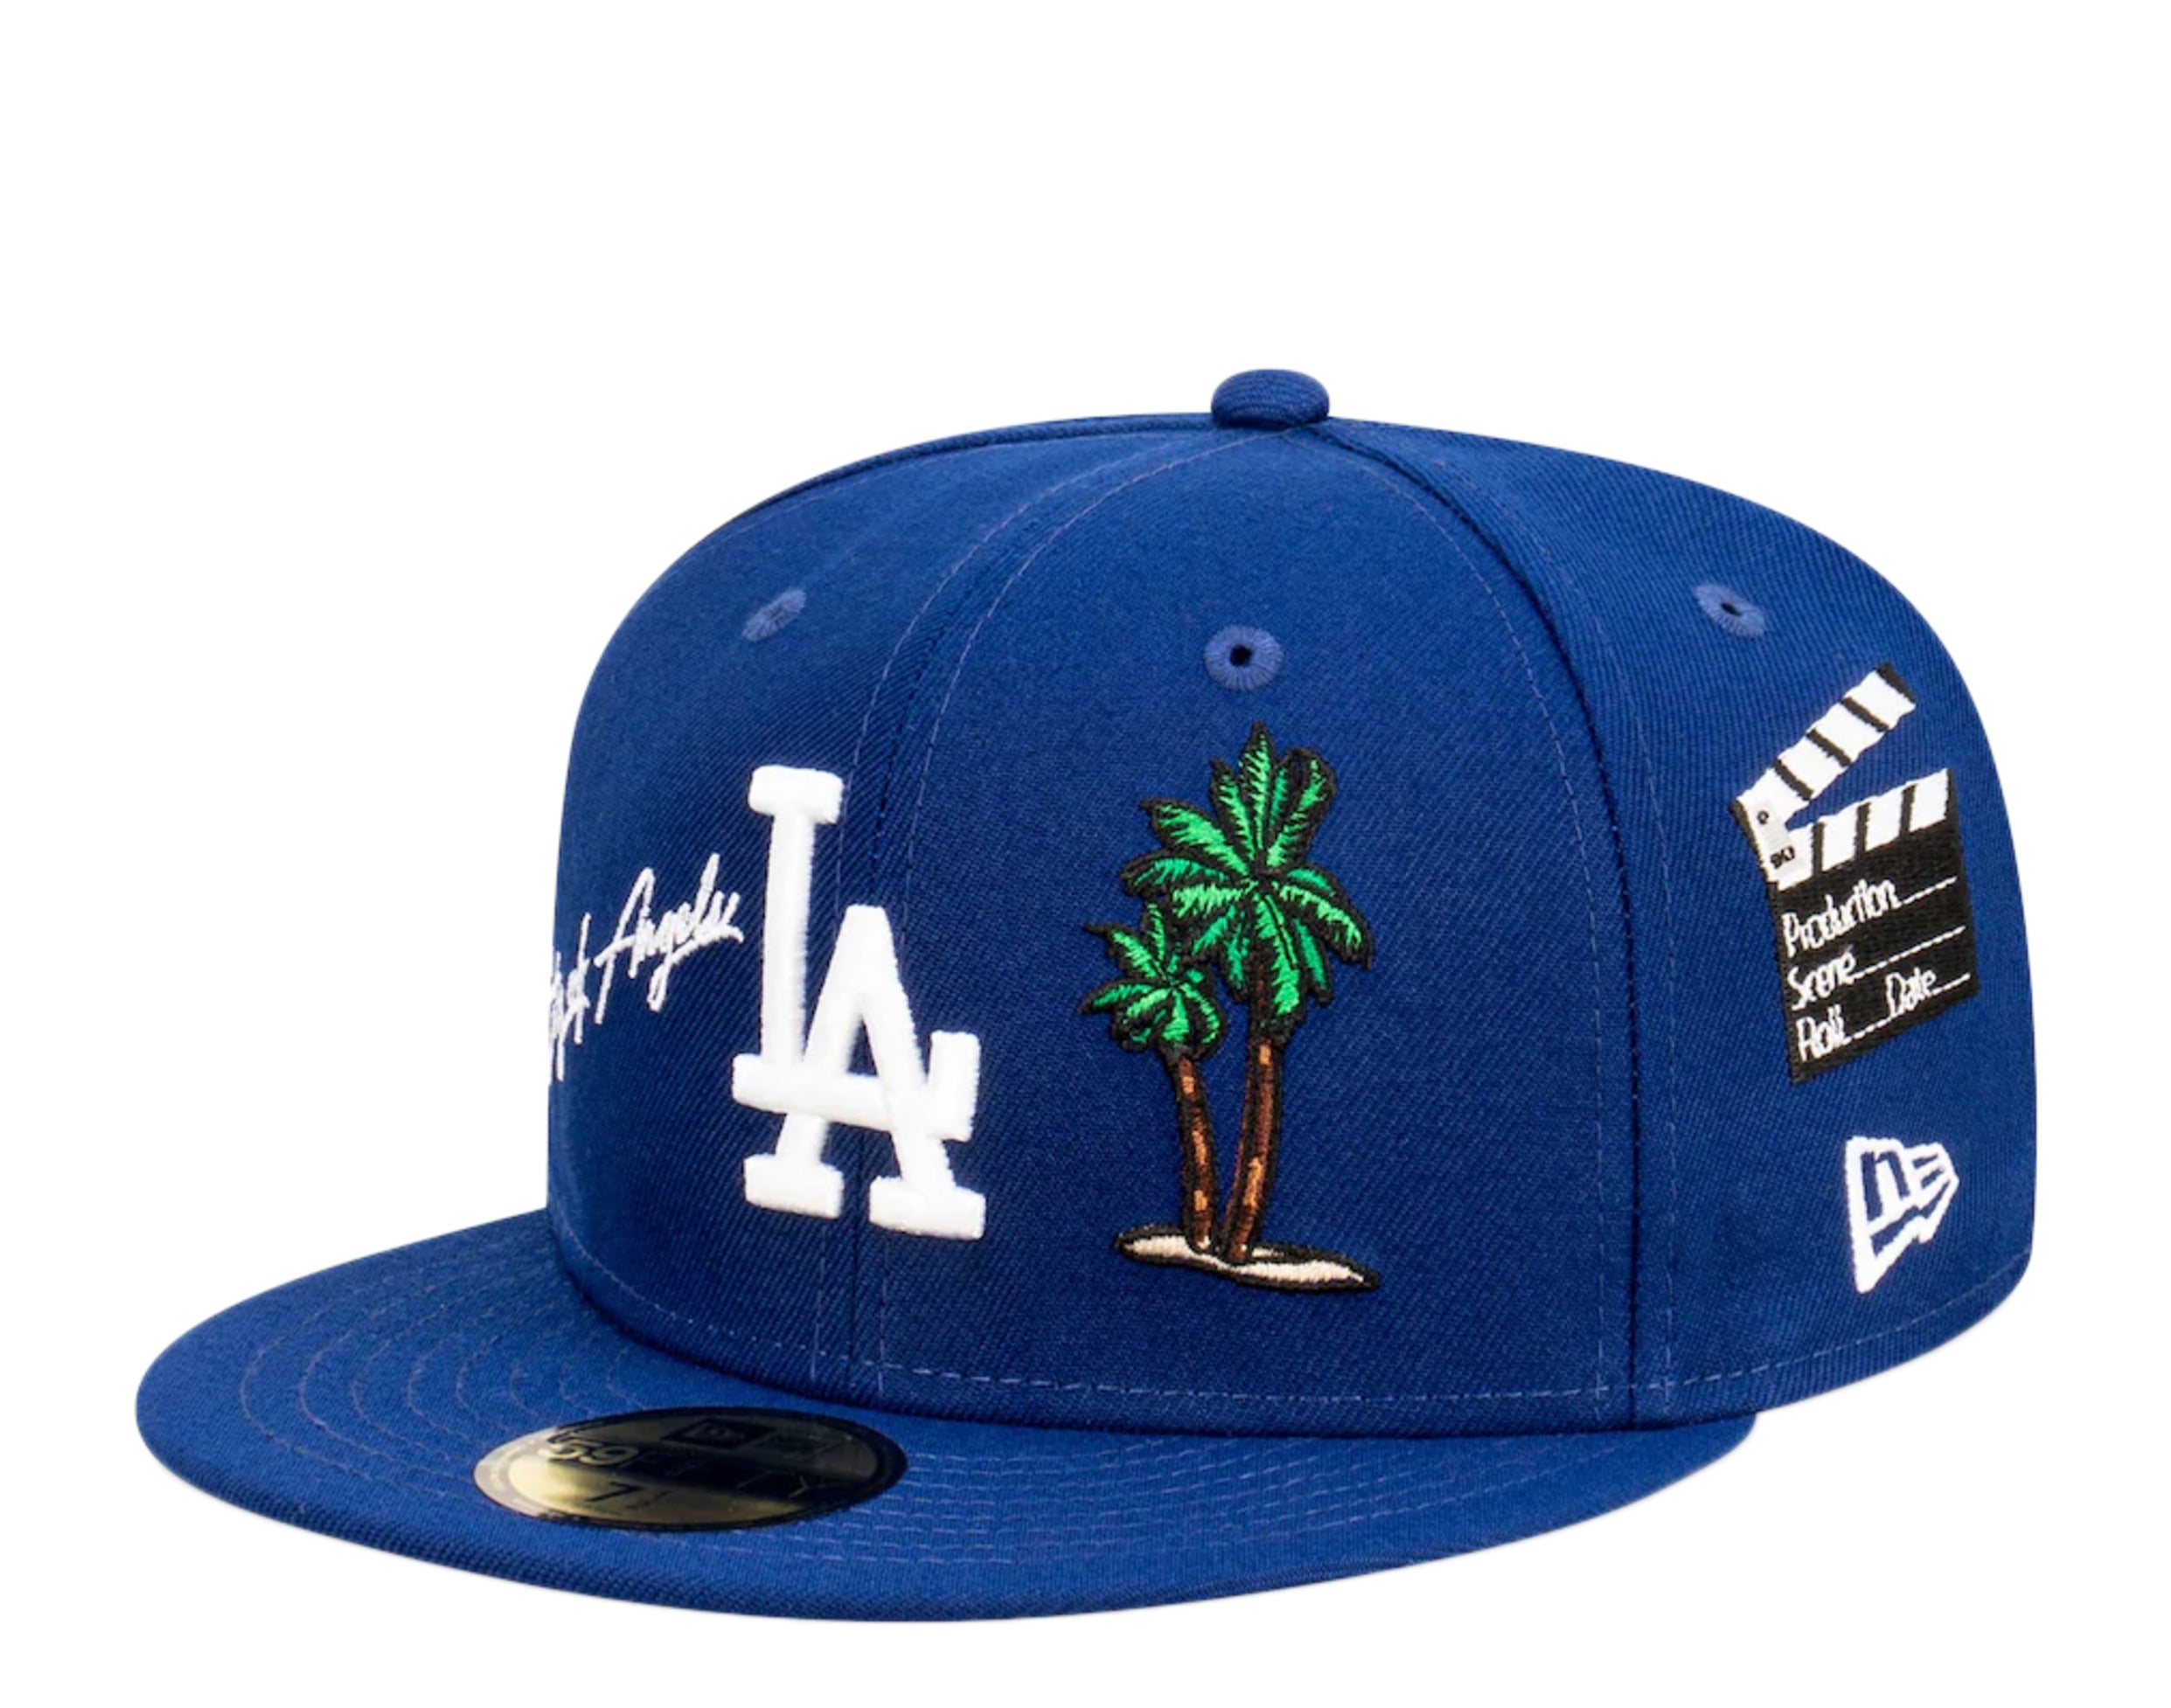 Los Angeles Dodgers New era cap. MLB значок. Los Angeles Dodgers New era Team describe 59fifty Fitted hat - Royal out of stock. New era icon.